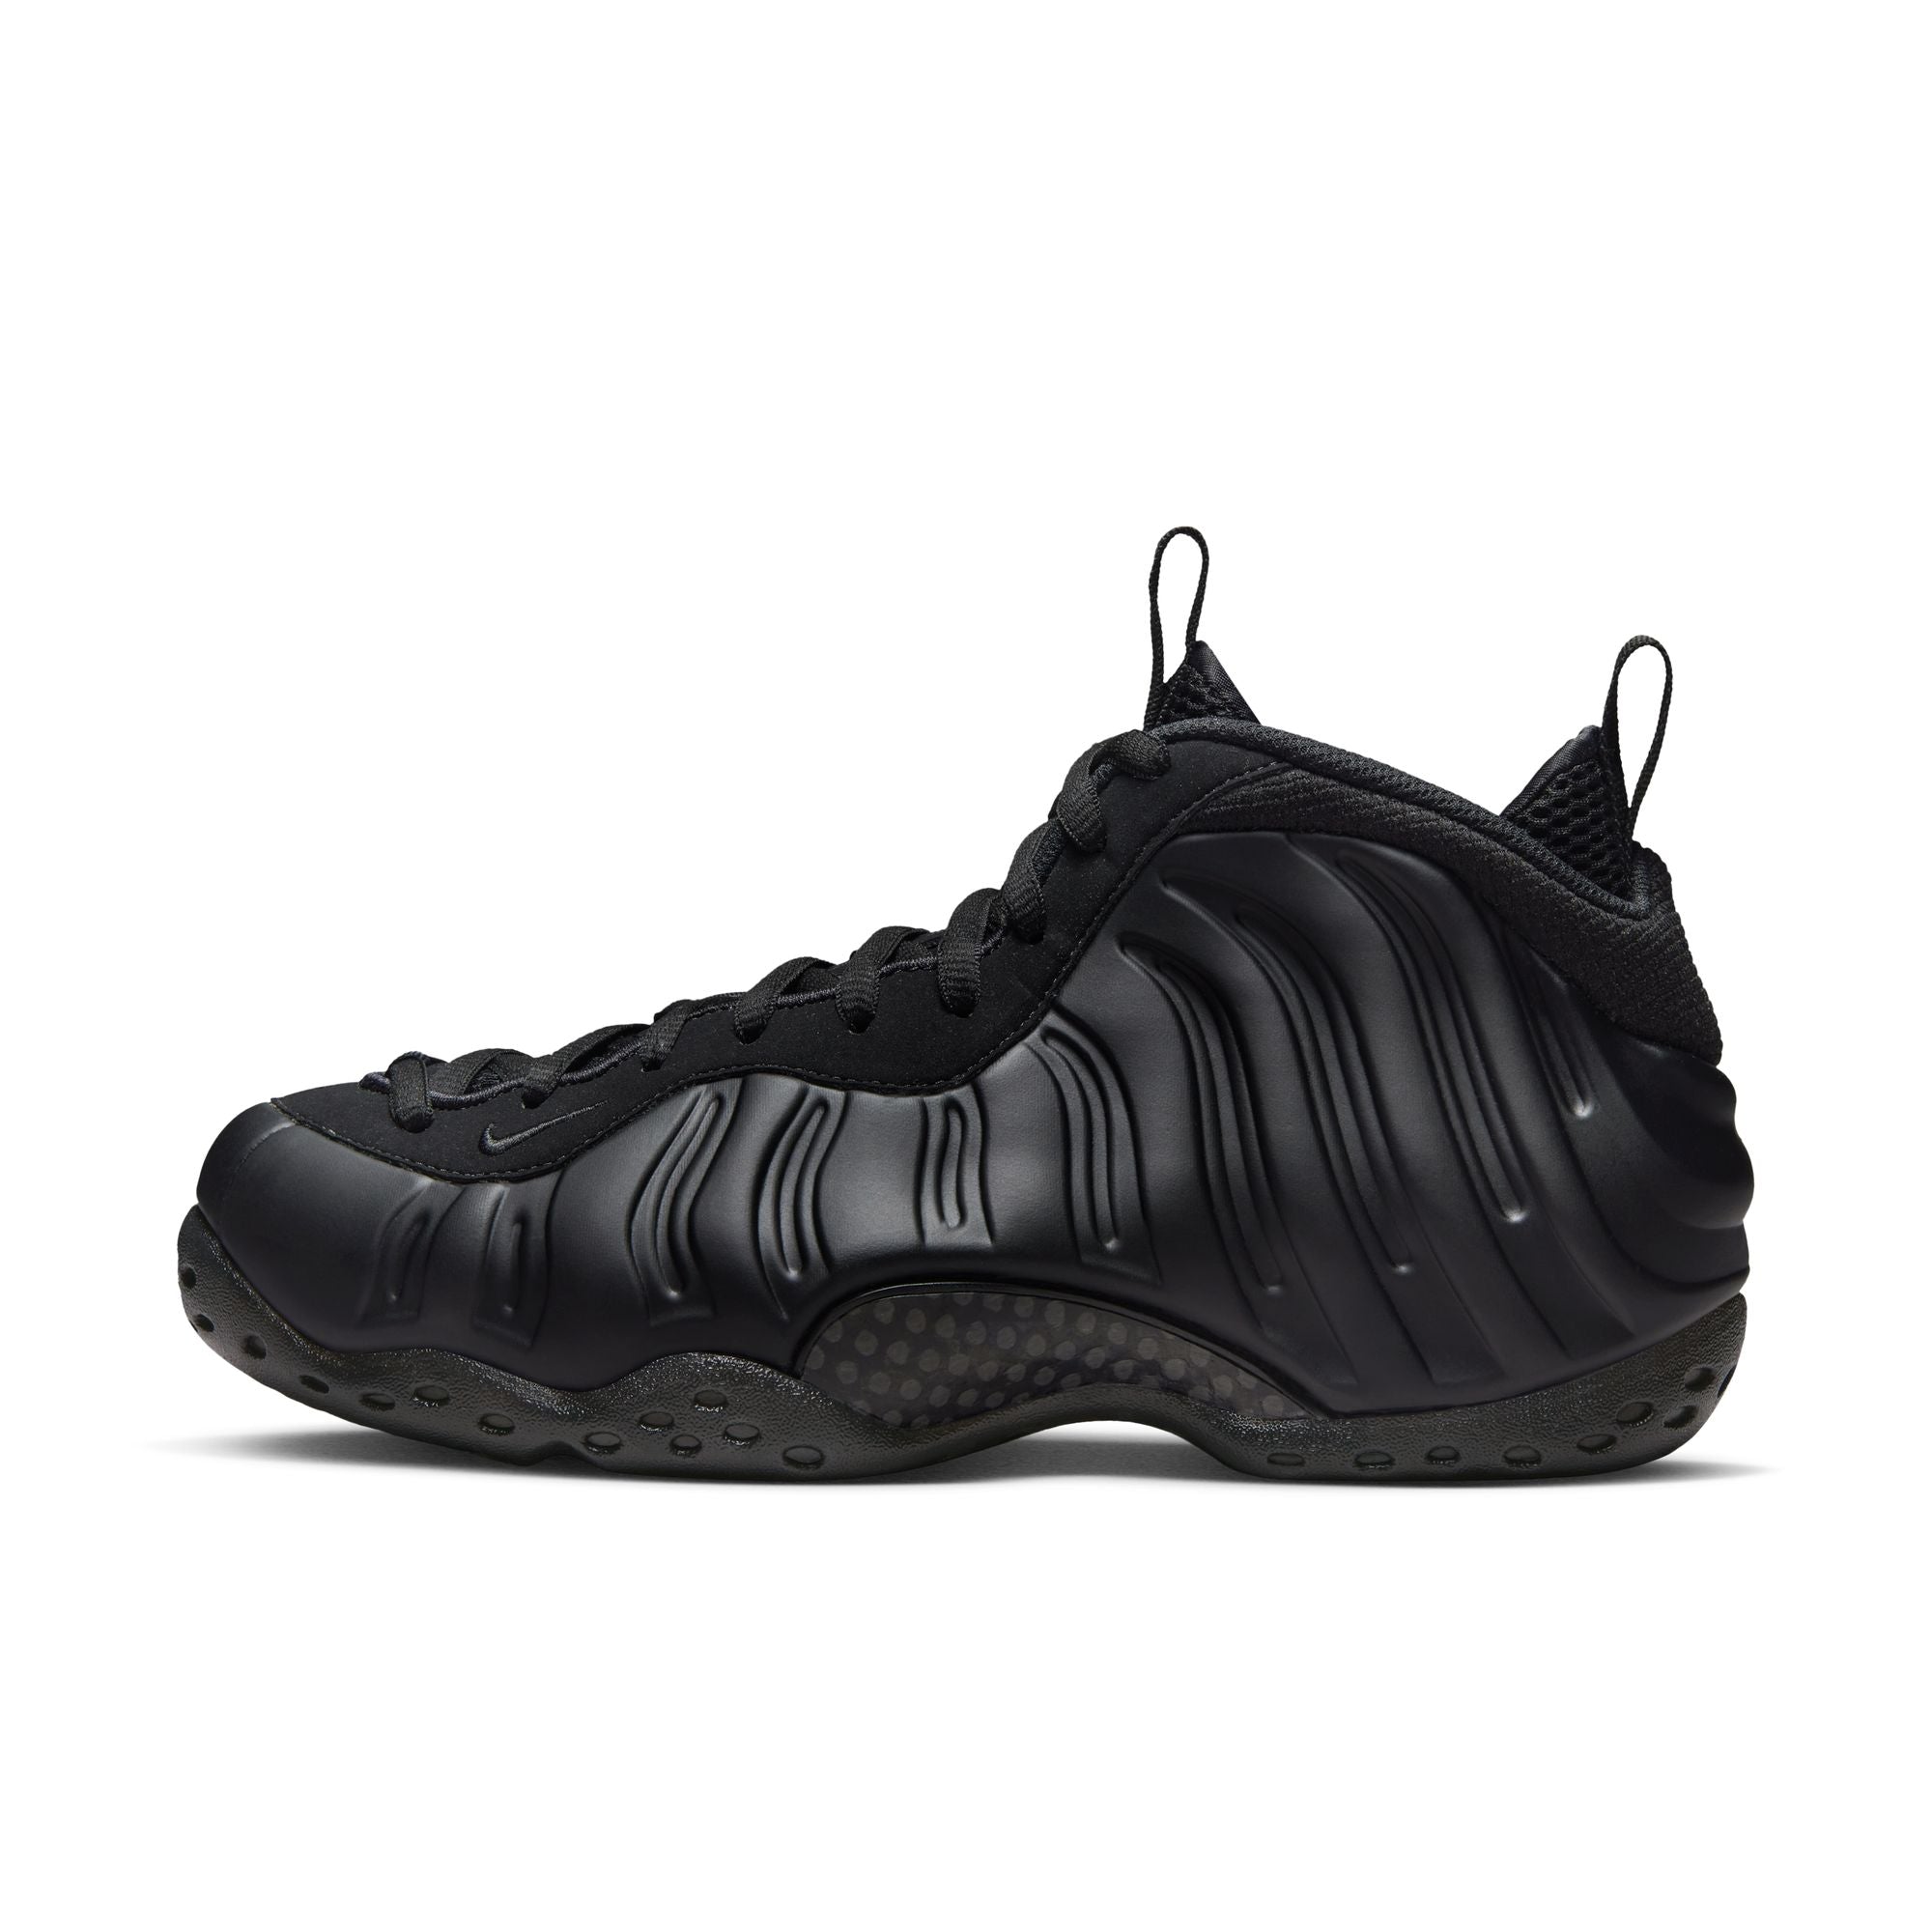 Foamposite One "Anthracite"